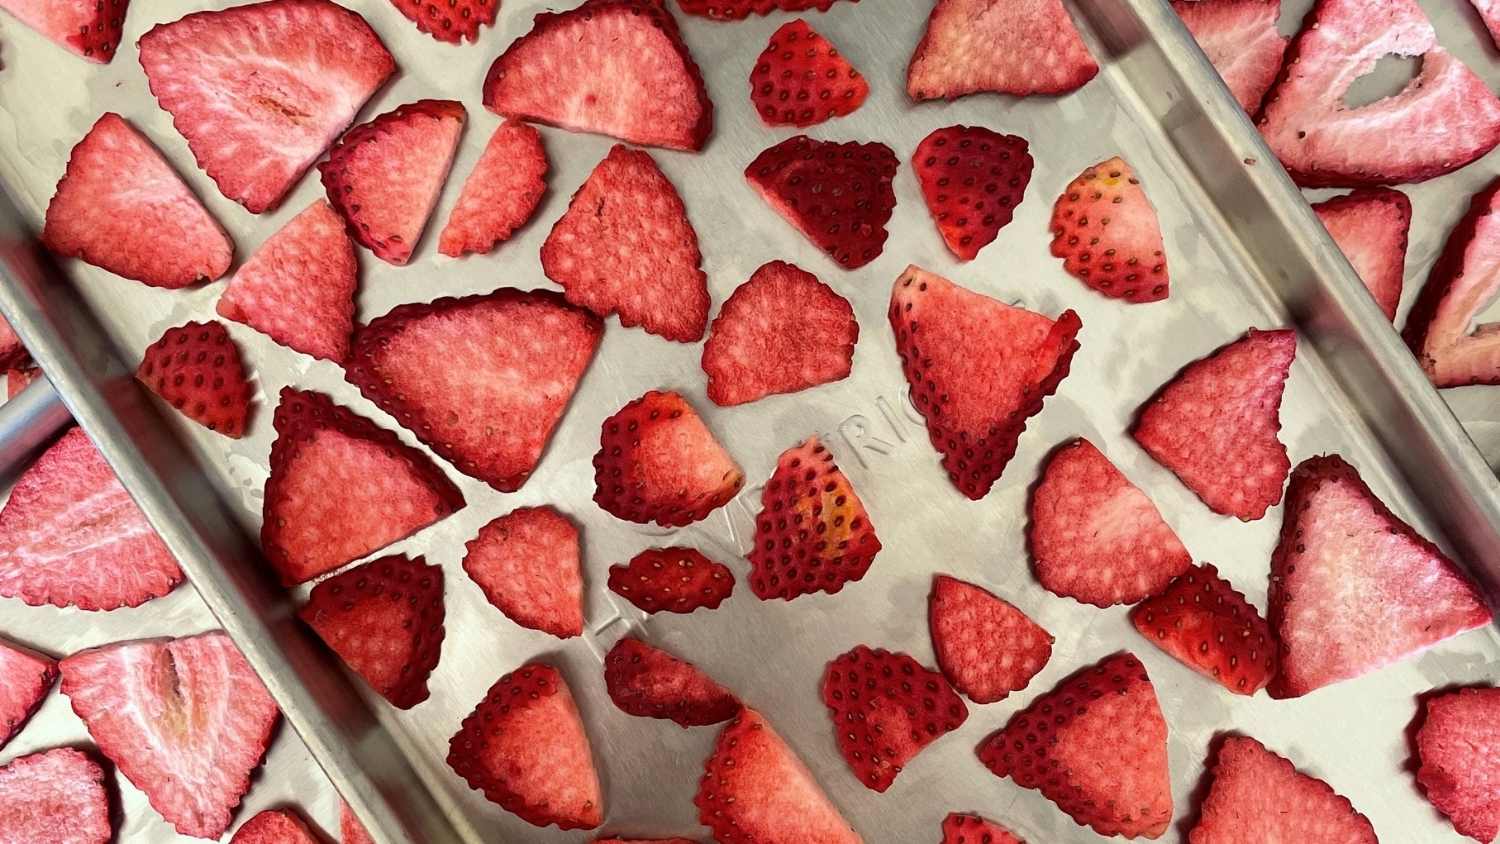 freeze-dried strawberries for backpacking meals